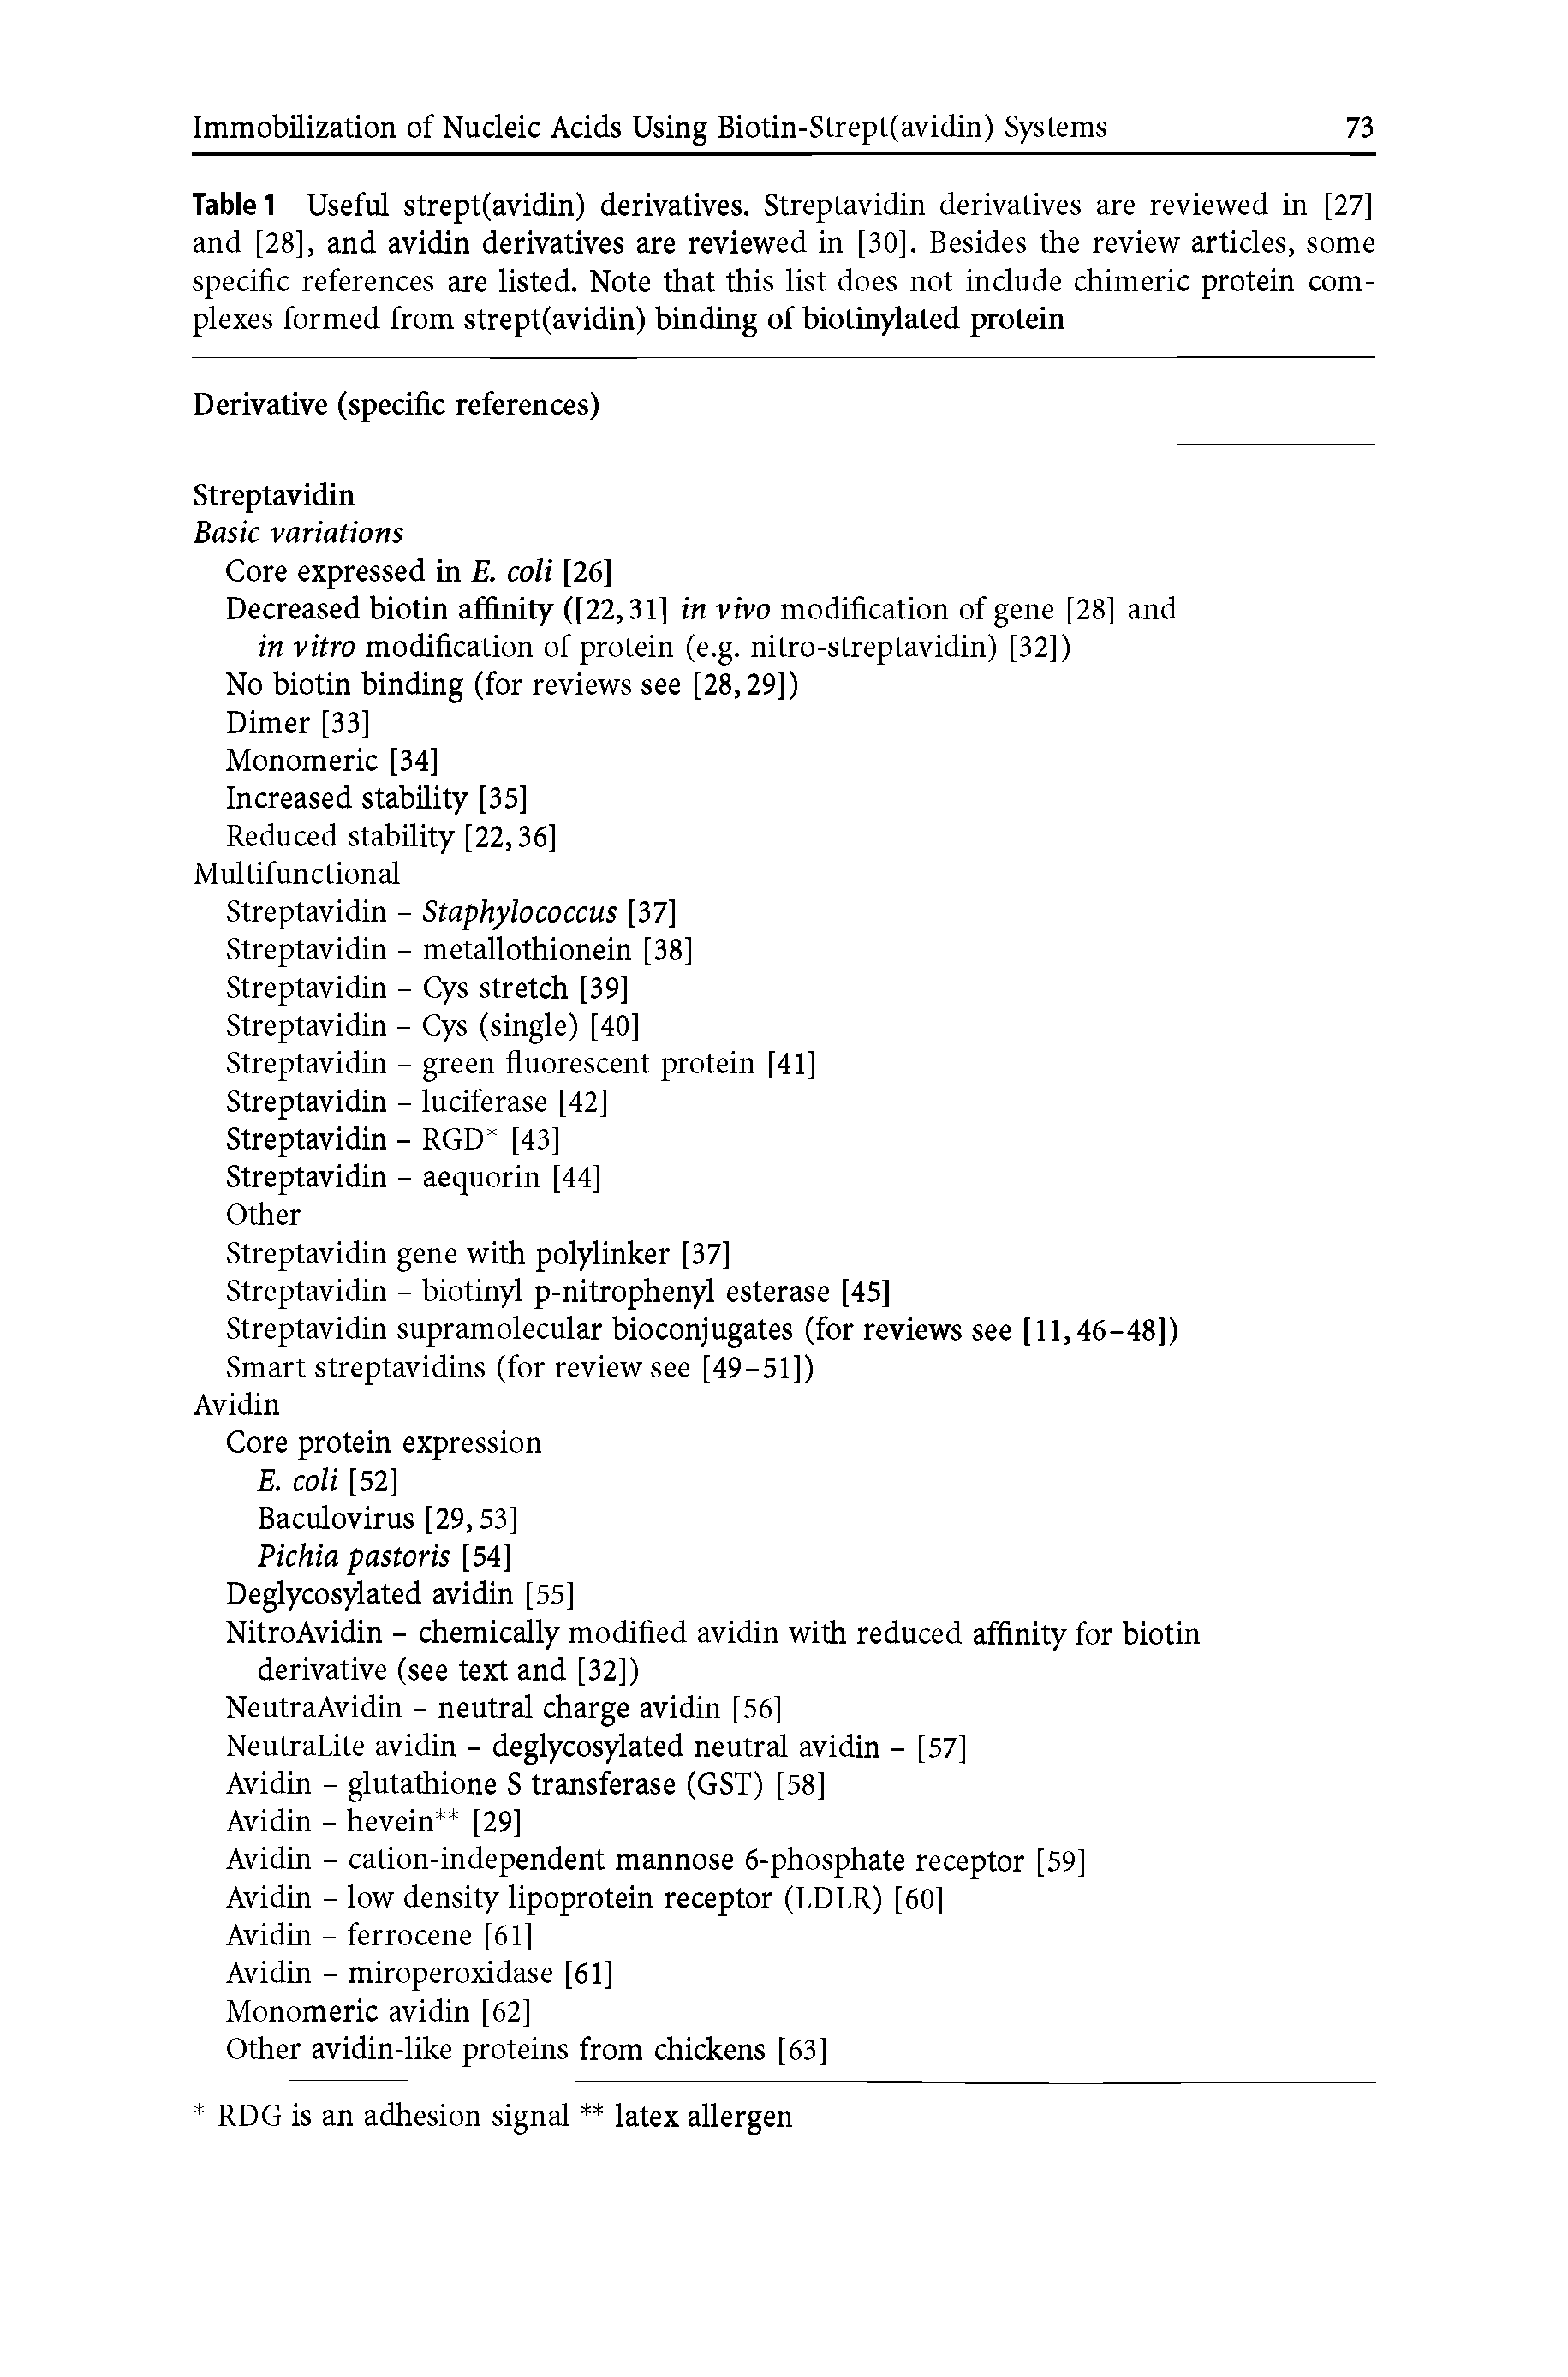 Table 1 Useful strept(avidin) derivatives. Streptavidin derivatives are reviewed in [27] and [28], and avidin derivatives are reviewed in [30], Besides the review articles, some specific references are listed. Note that this list does not include chimeric protein complexes formed from strept(avidin) binding of biotinylated protein...